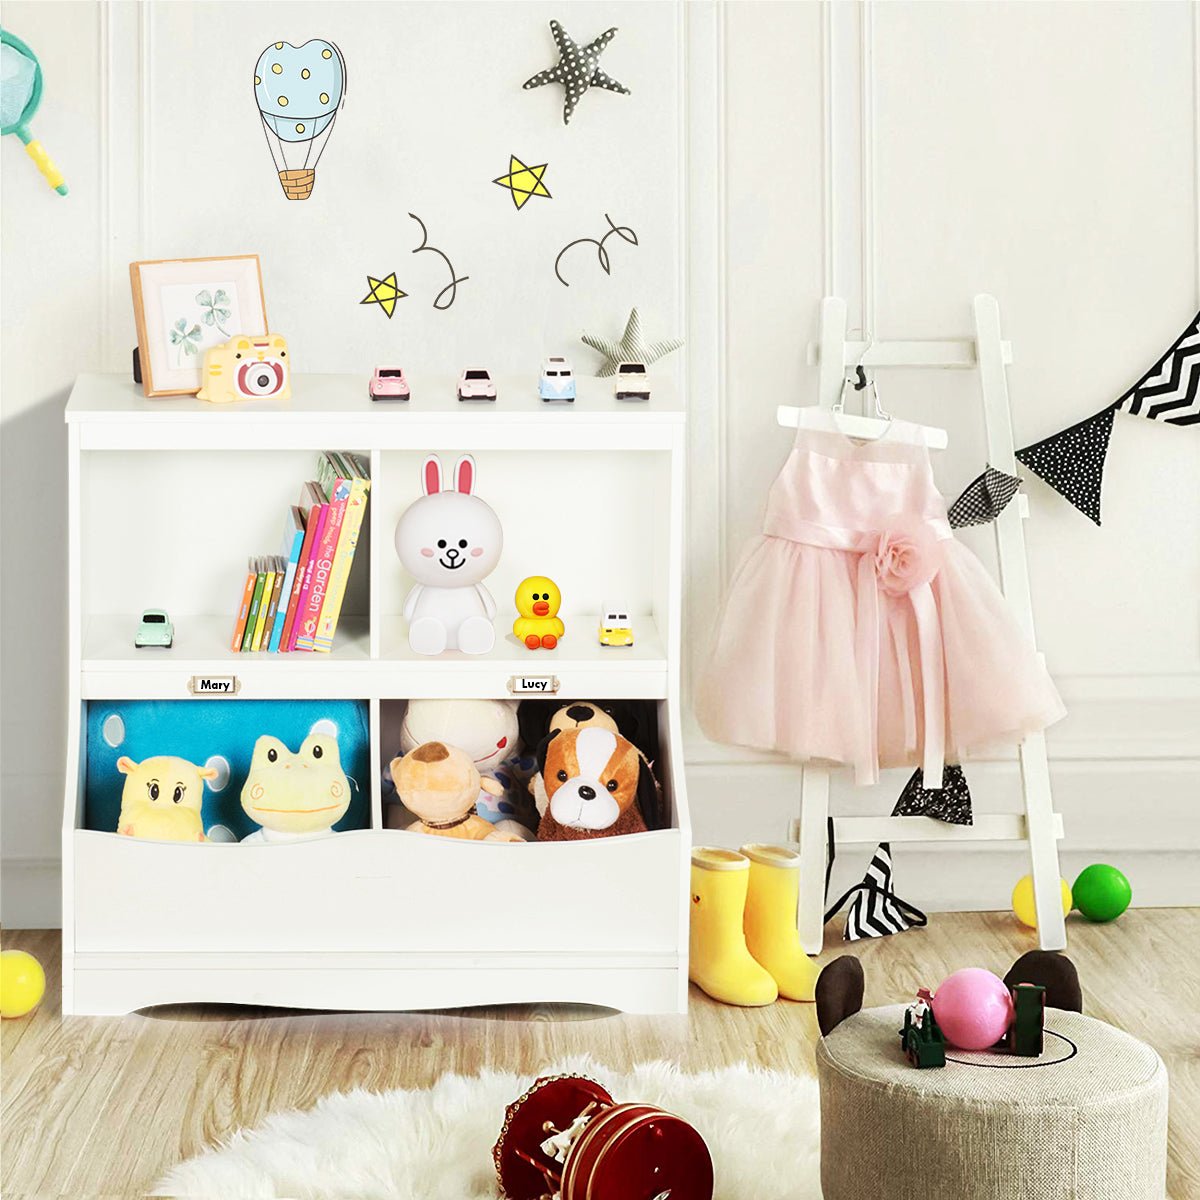 12 Tier White Toy Shelf - Lacquered Surface for Kid's Room Organization